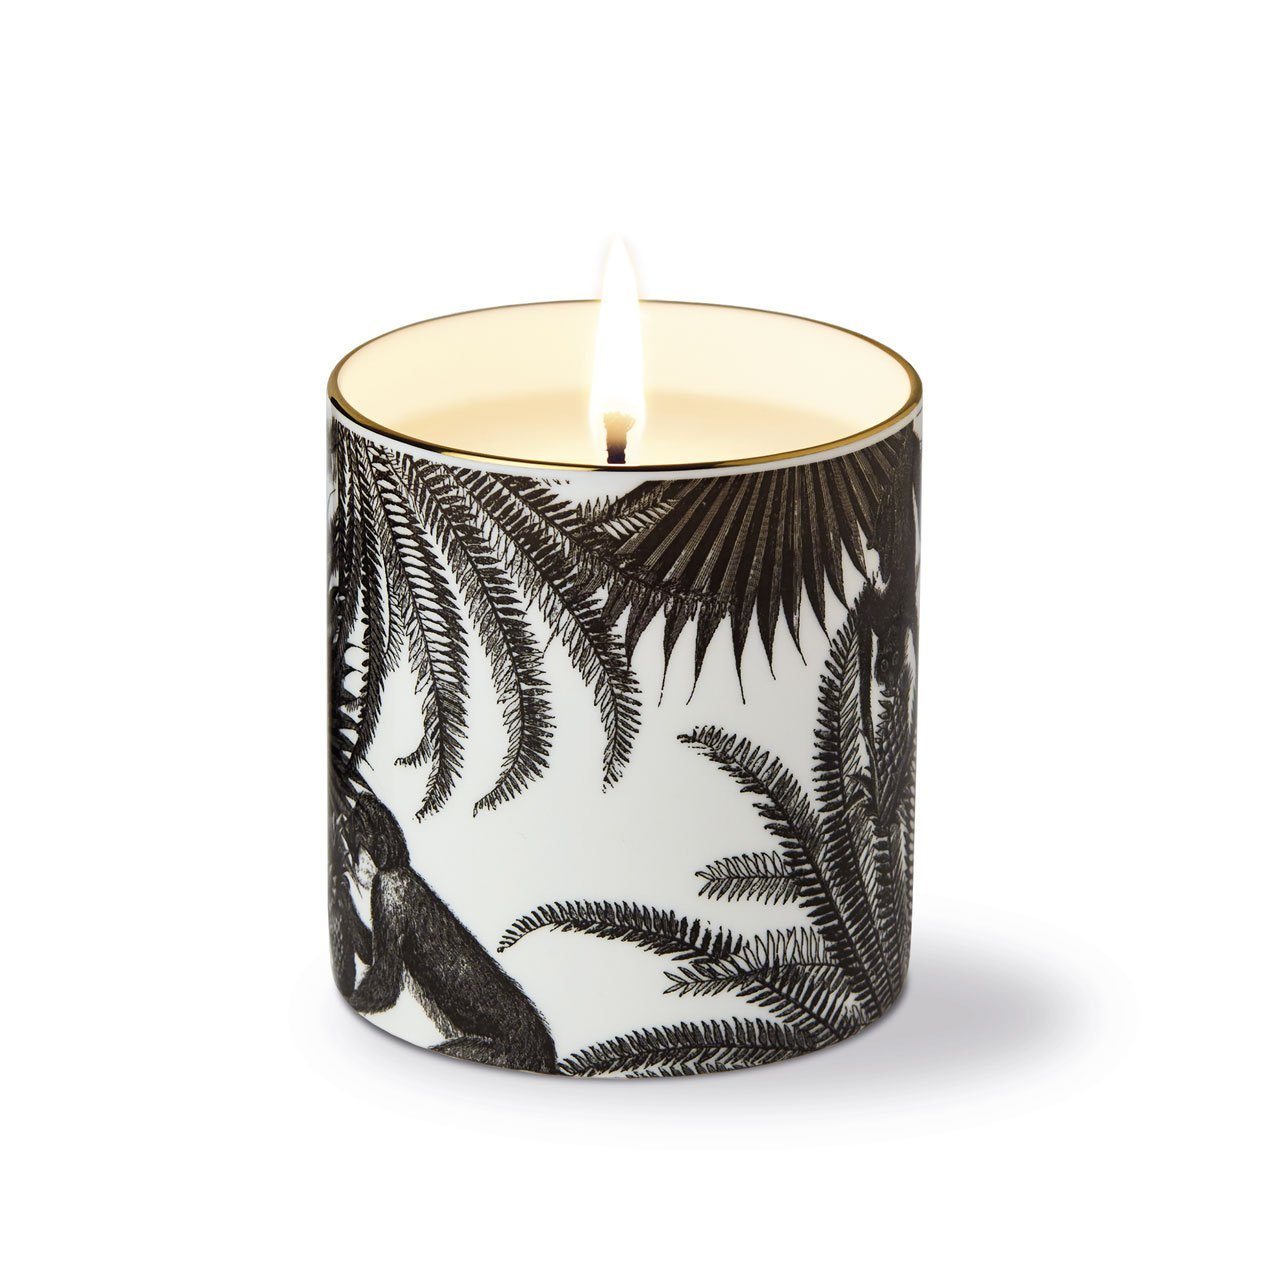 The Tropical Paradise Ceramic Candle - Chase and Wonder - Proudly Made in Britain